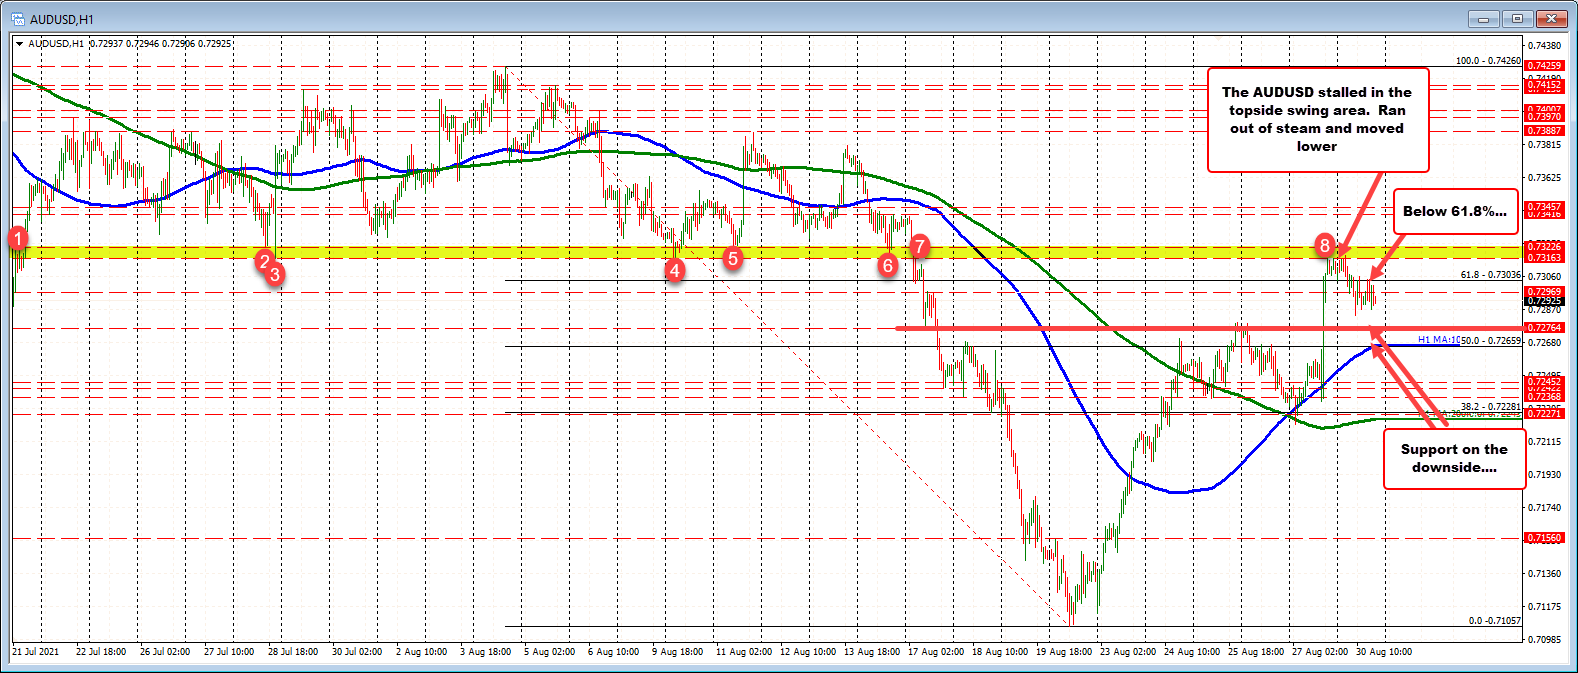 AUDUSD lower on the day despite gains in stocks